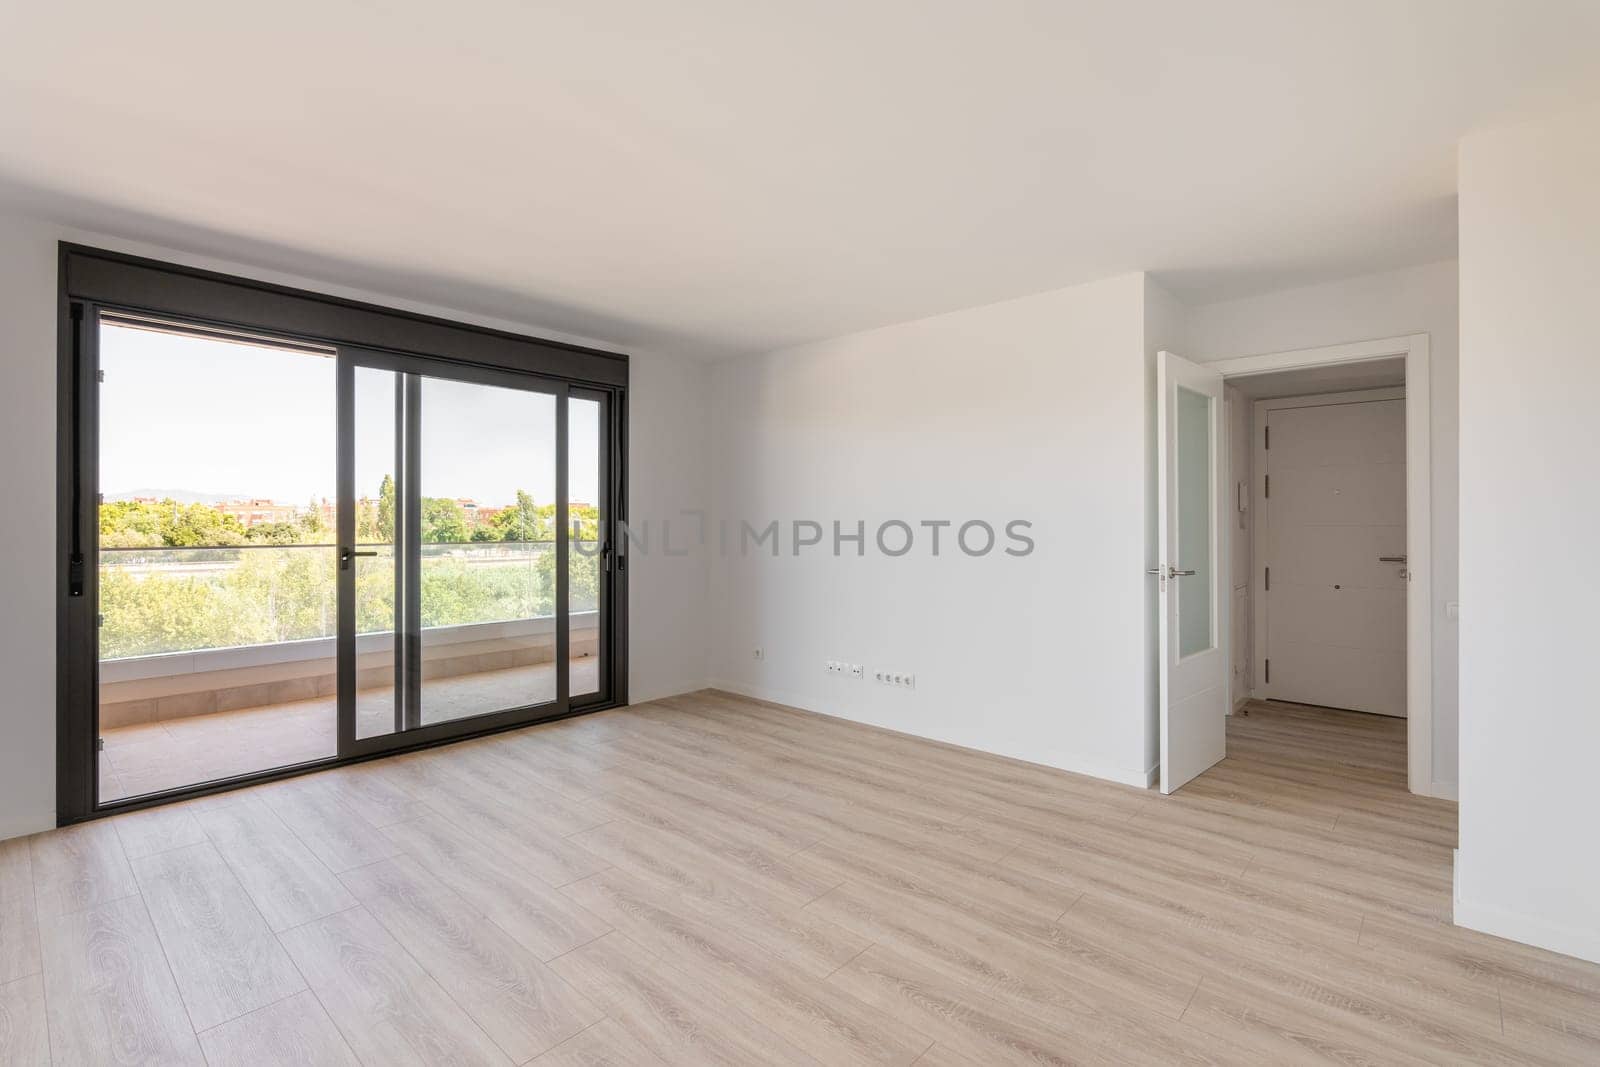 Spacious large room with wooden parquet structure and panoramic window overlooking beautiful landscape among complex of new buildings and balcony with elegant glass border. Mortgage and moving concept by apavlin